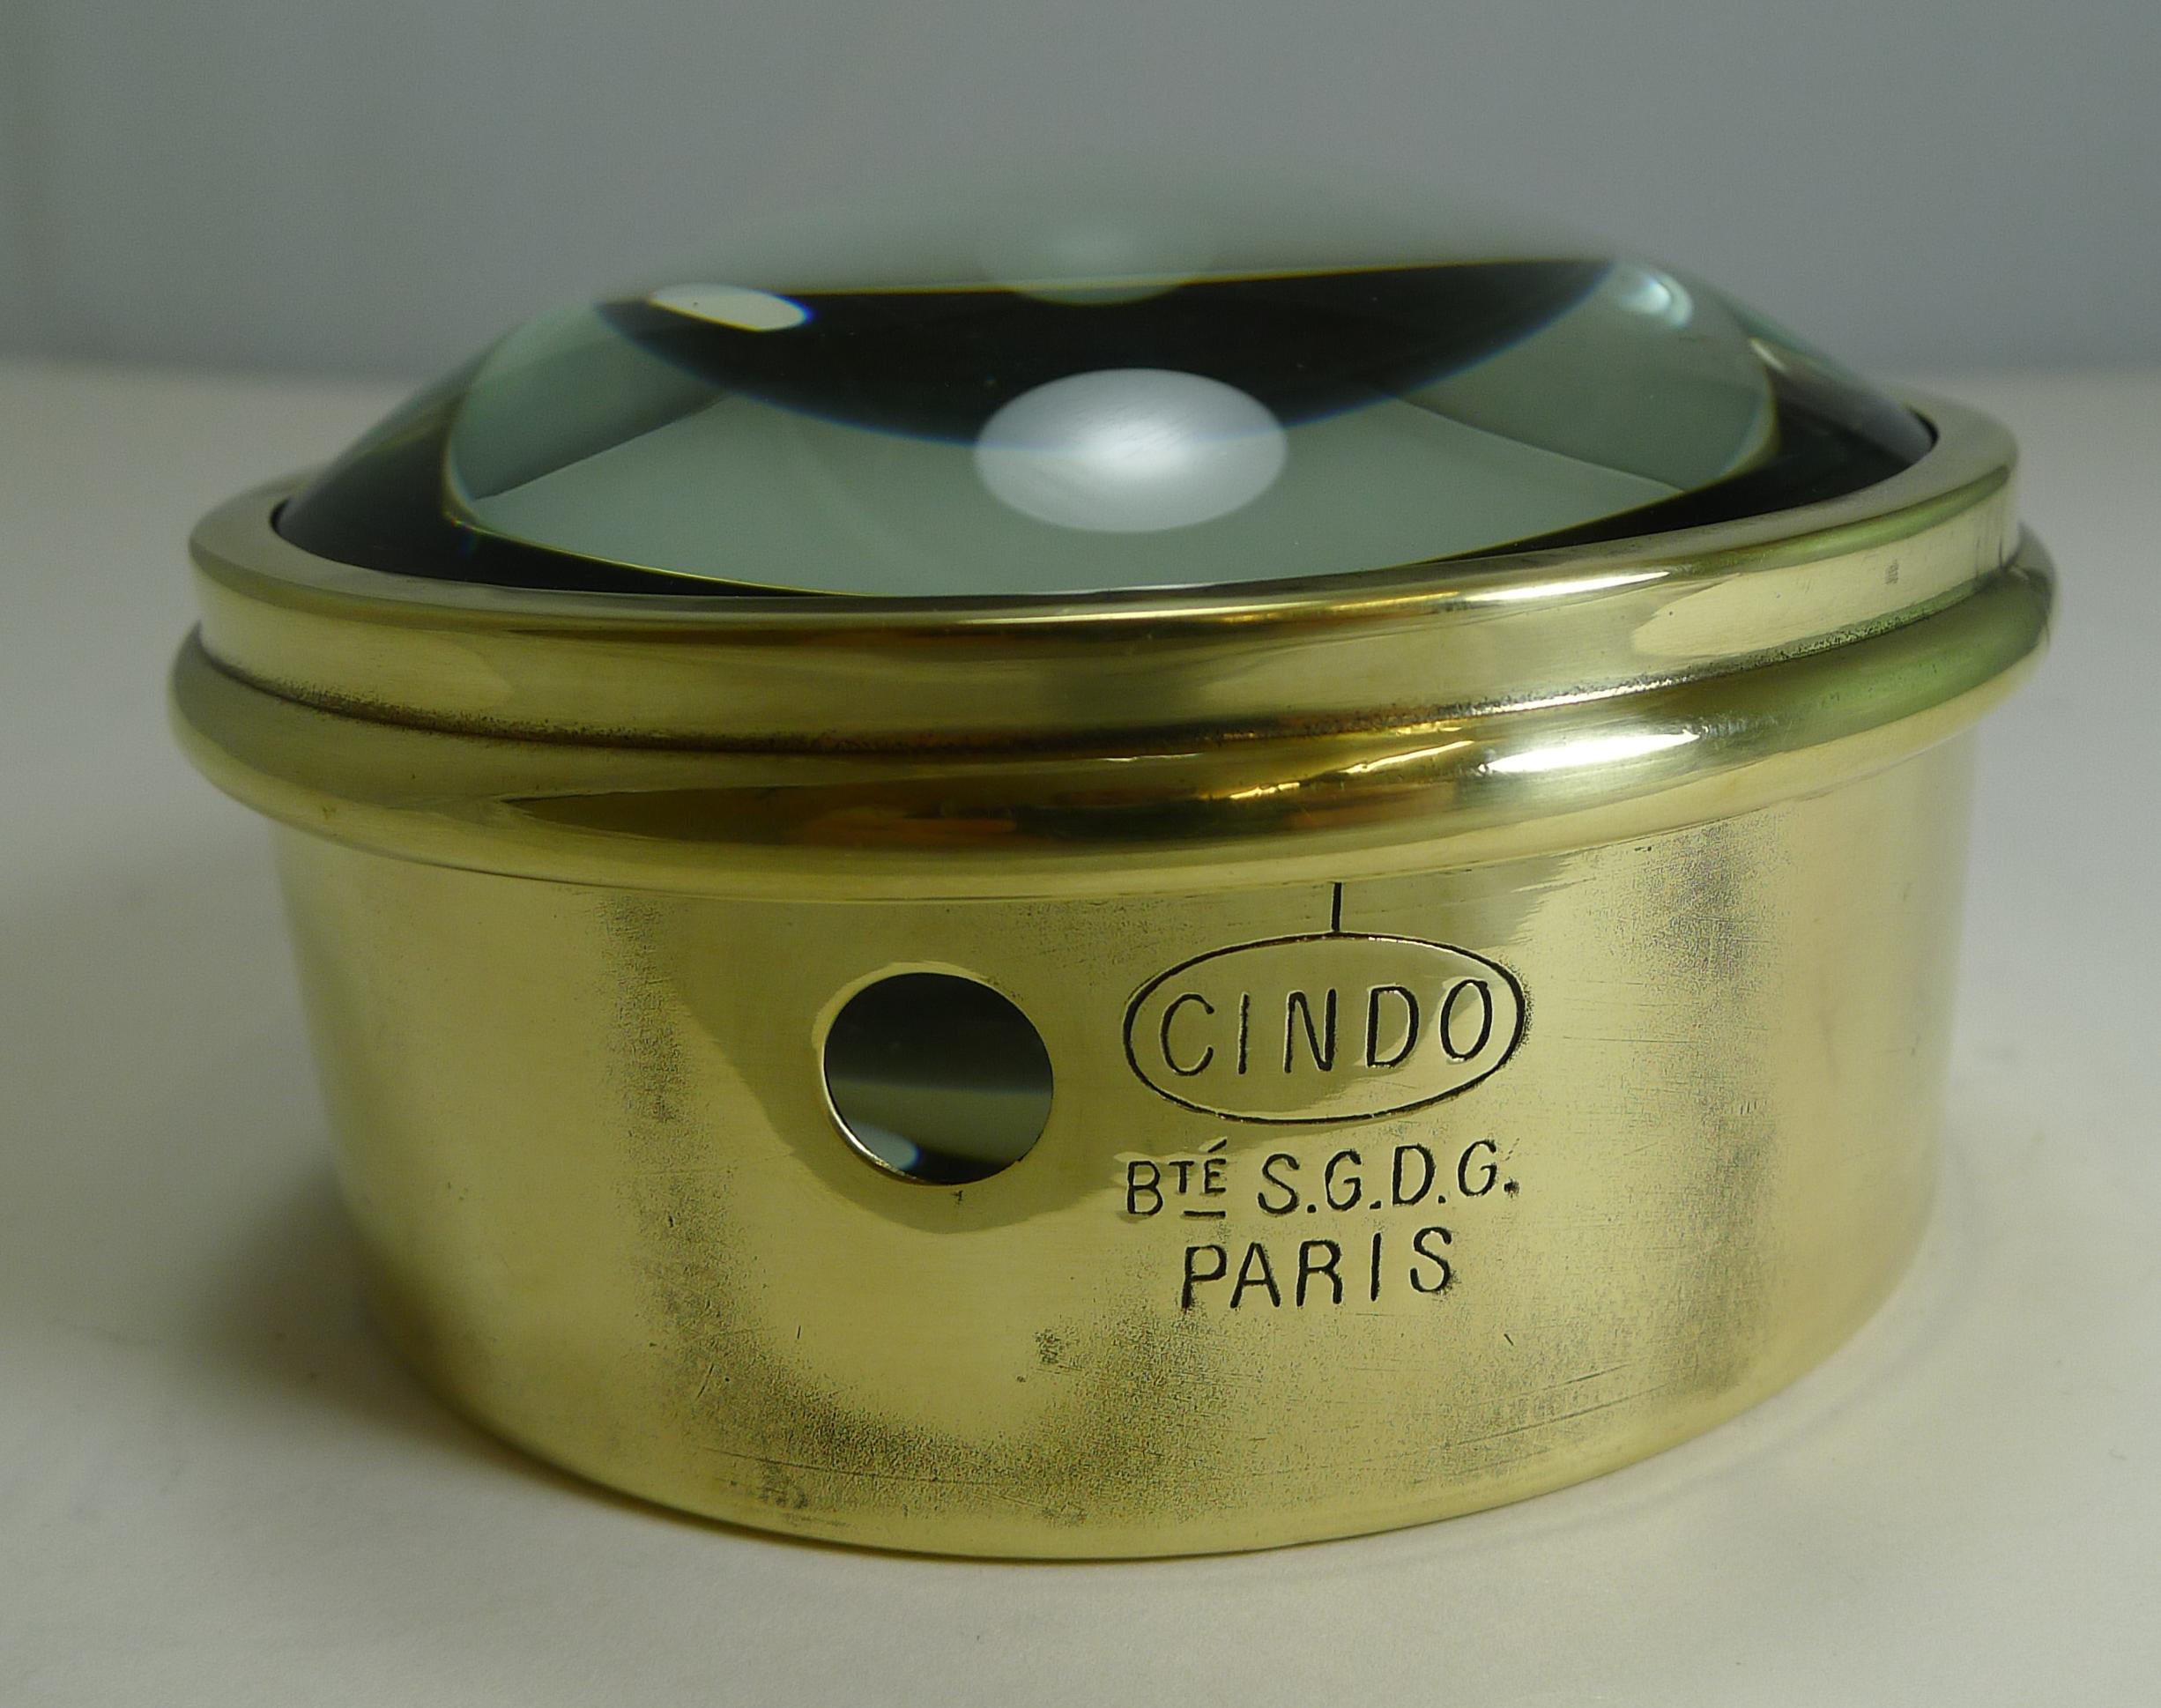 Early 20th Century French Antique Brass Desk Magnifying Glass/Paperweight circa 1910, Cindo, Paris